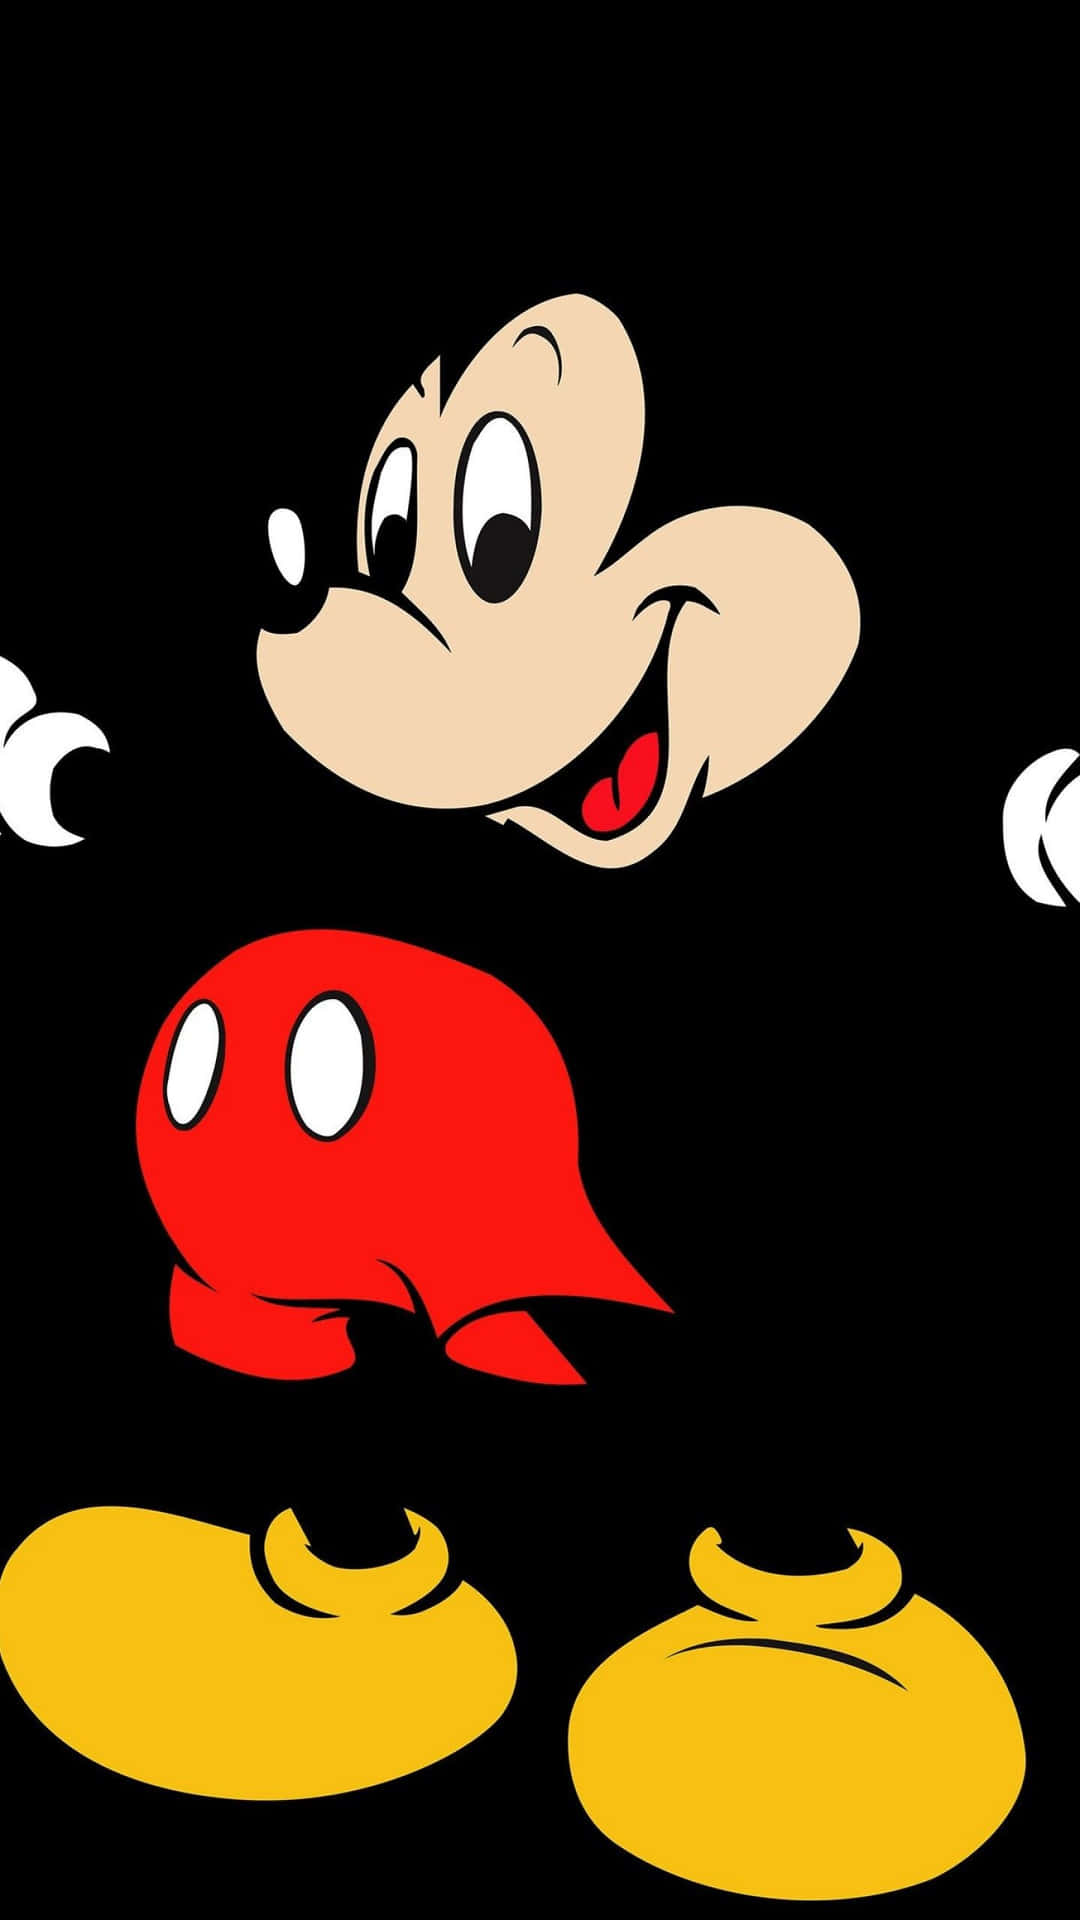 Download Cute Mickey Mouse Wallpaper 